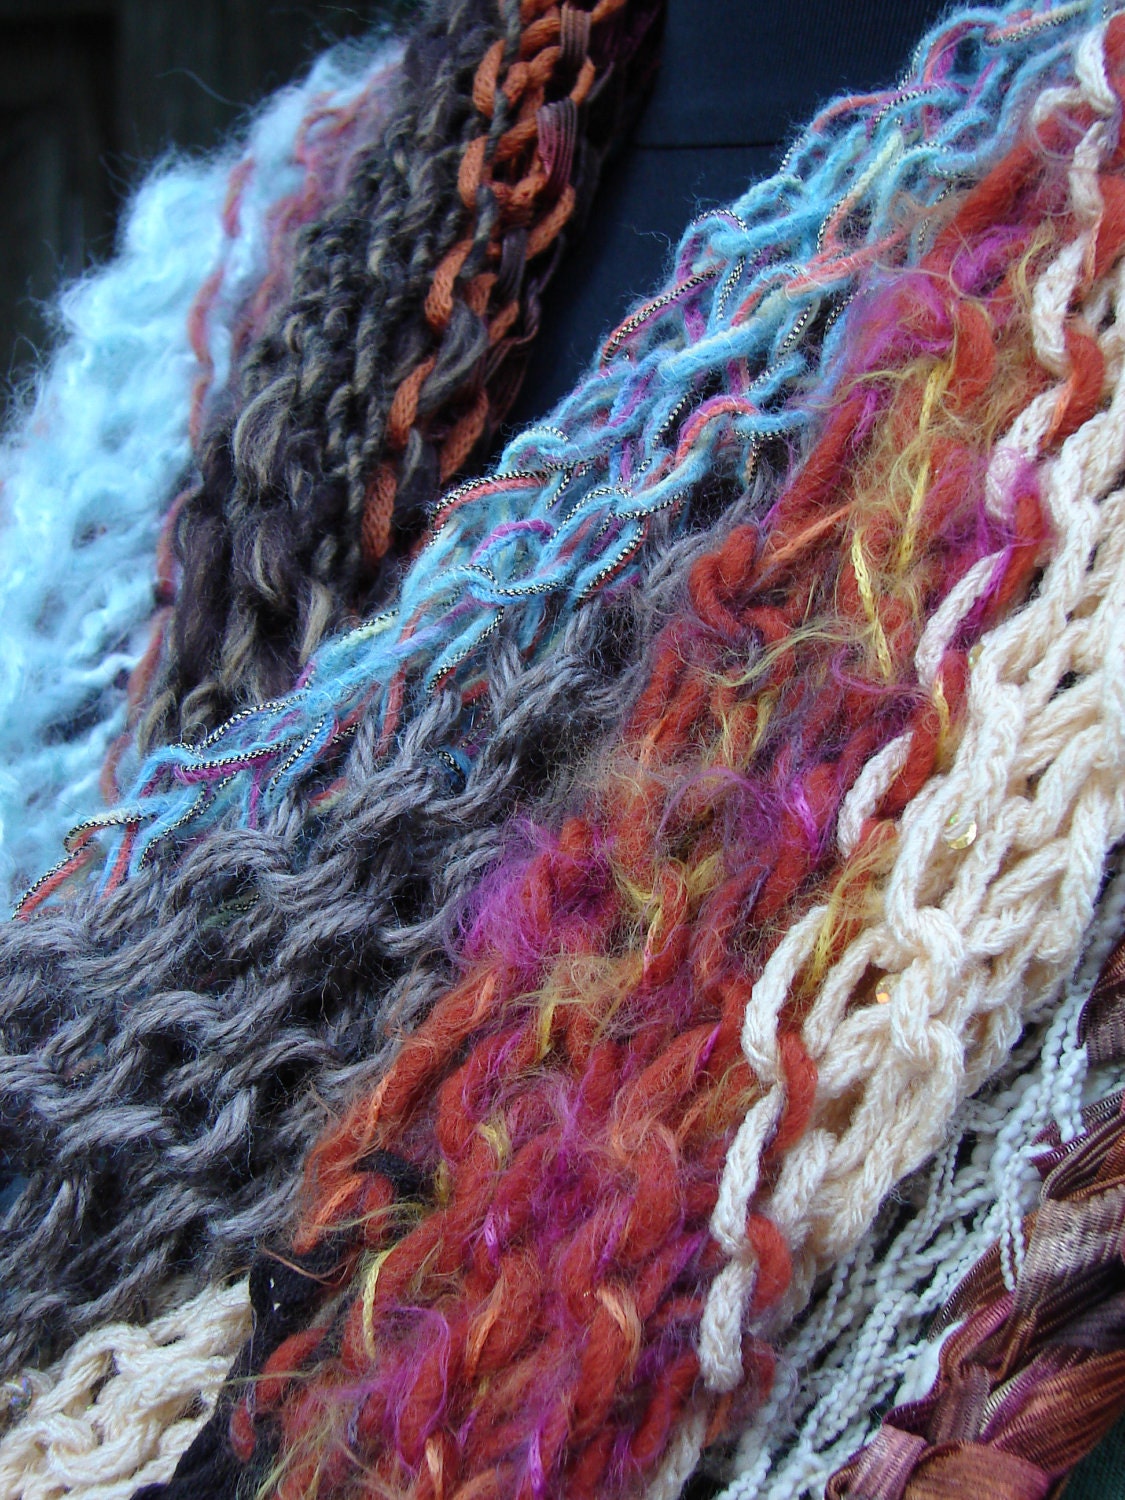 Impressionist Scarf (num. 4) in Autumn Colors with Specialty Yarns Knit in a Diagonal Stripe